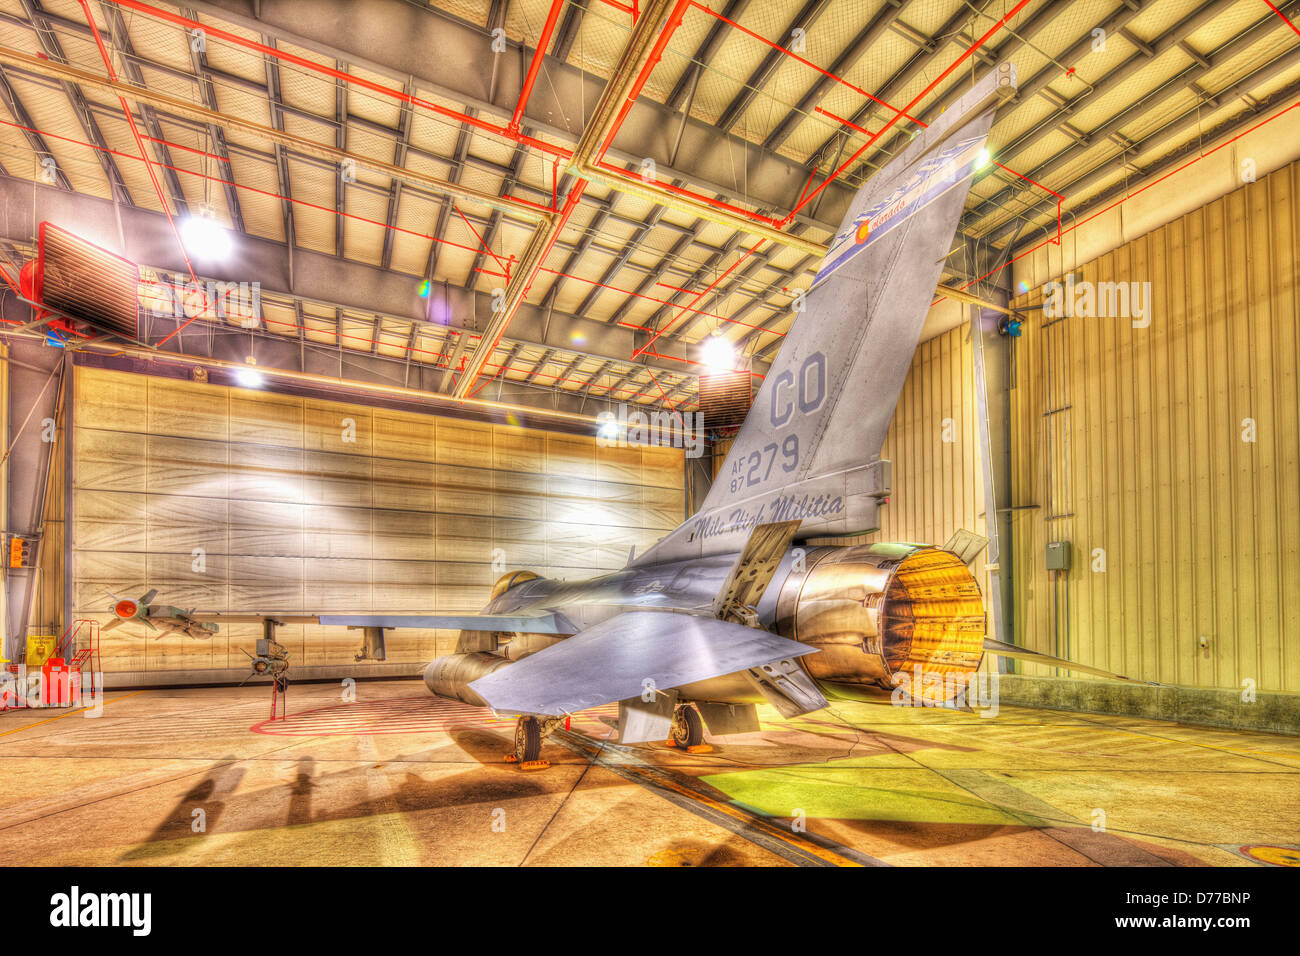 F-16 Alert Jet in Hangar Loaded Live Weapons Rear View High Dynamic Range or HDR Image Stock Photo